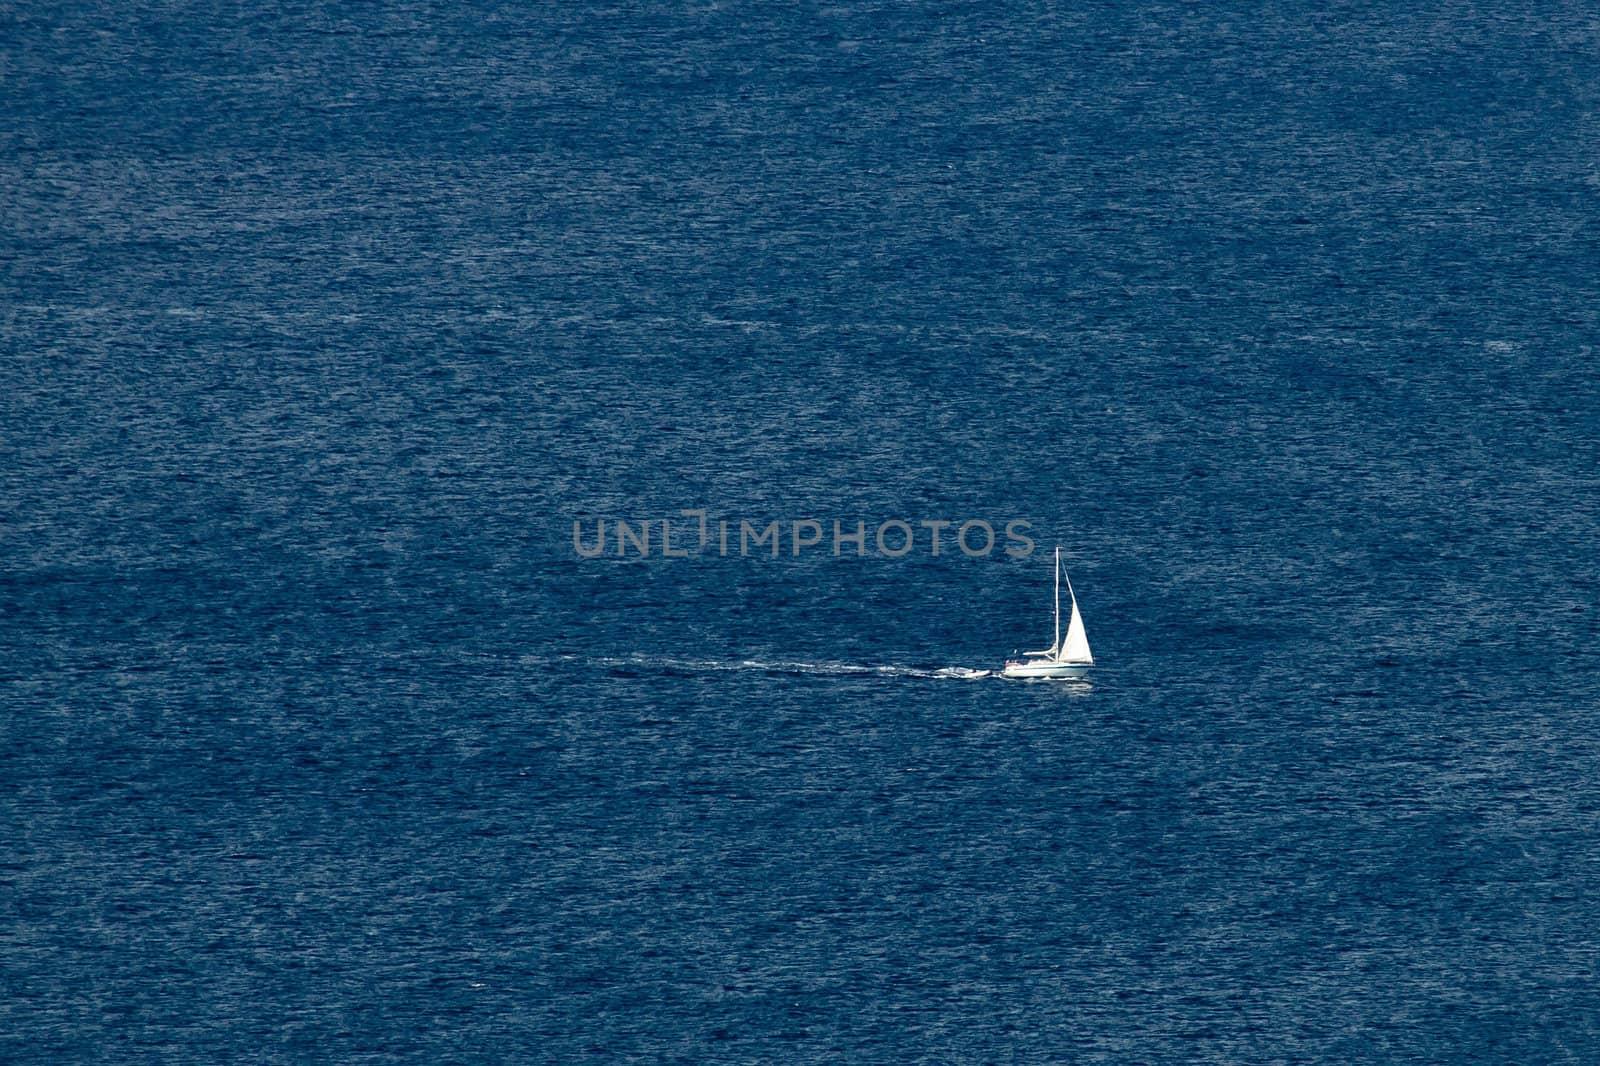 Sailboat on open sea, blue waters